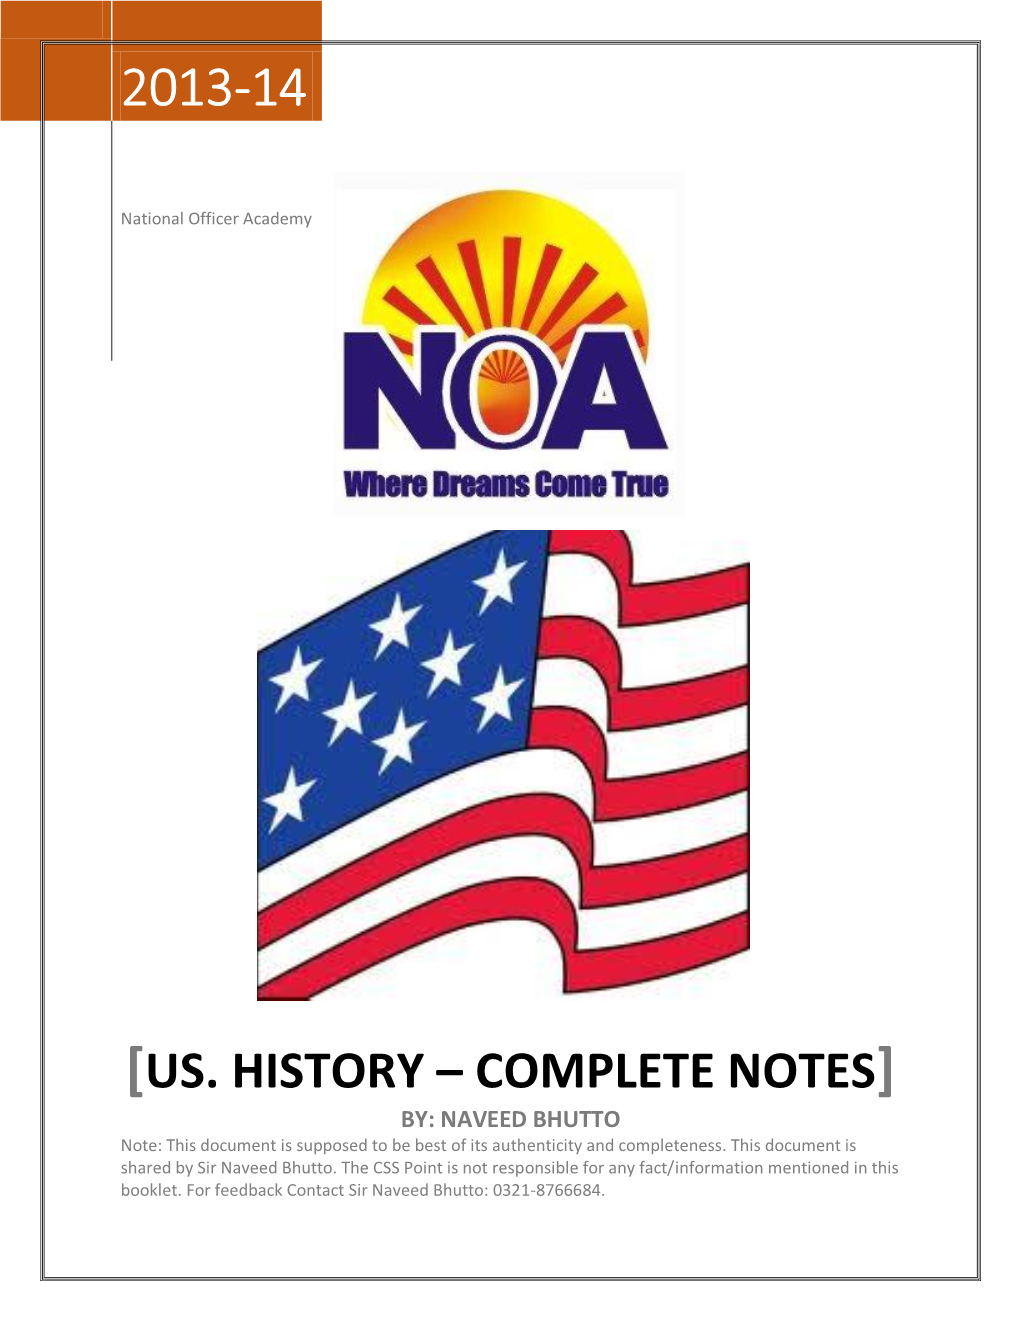 [US. HISTORY – COMPLETE NOTES] BY: NAVEED BHUTTO Note: This Document Is Supposed to Be Best of Its Authenticity and Completeness